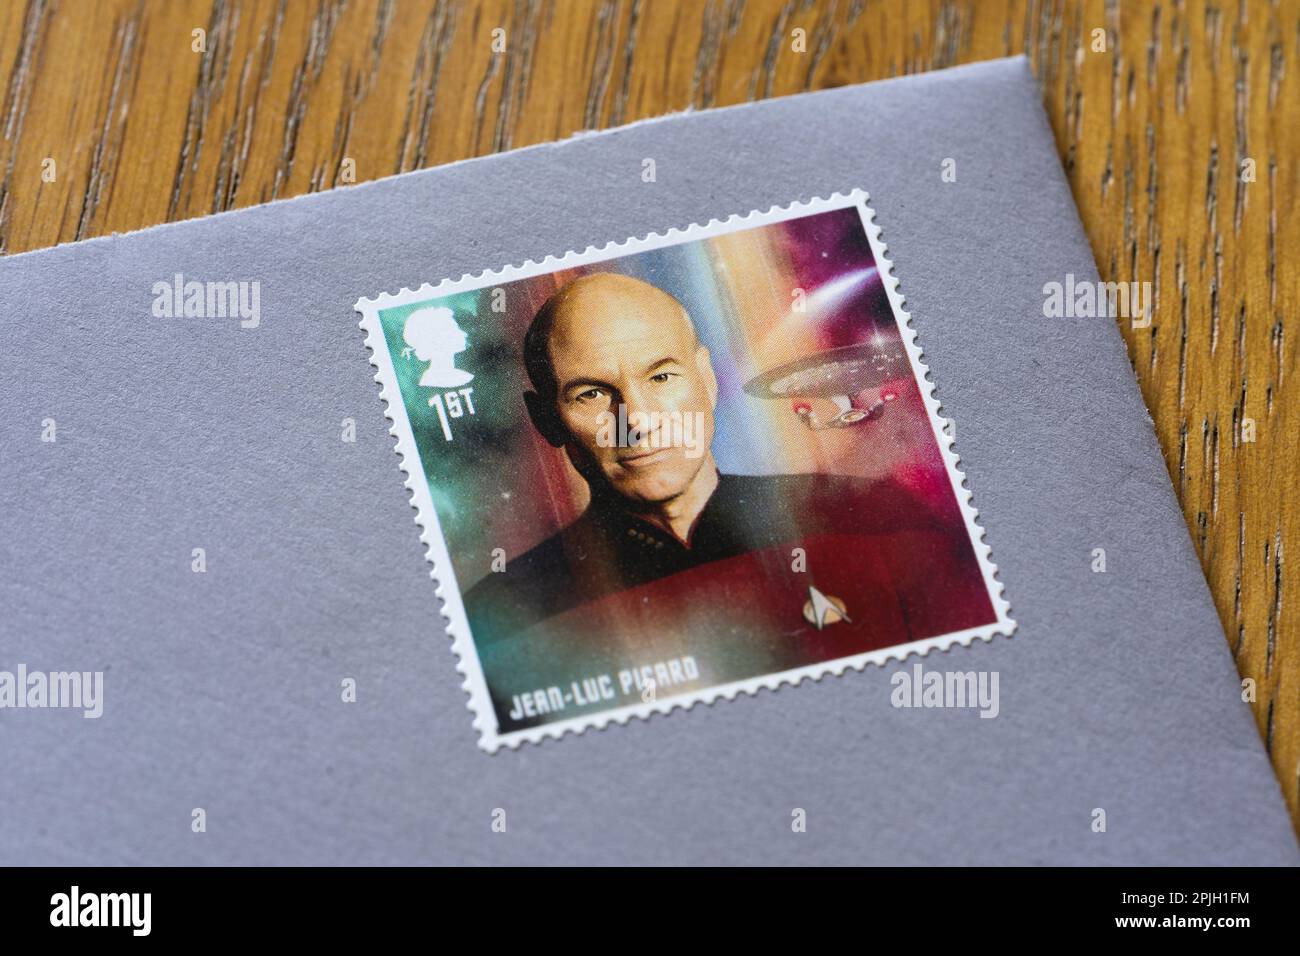 Commemorative Jean Luc Picard stamp by Royal Mail, UK. Jean Luc Picard was a fictional captain of the Federation starship USS Enterprise in Star Trek Stock Photo